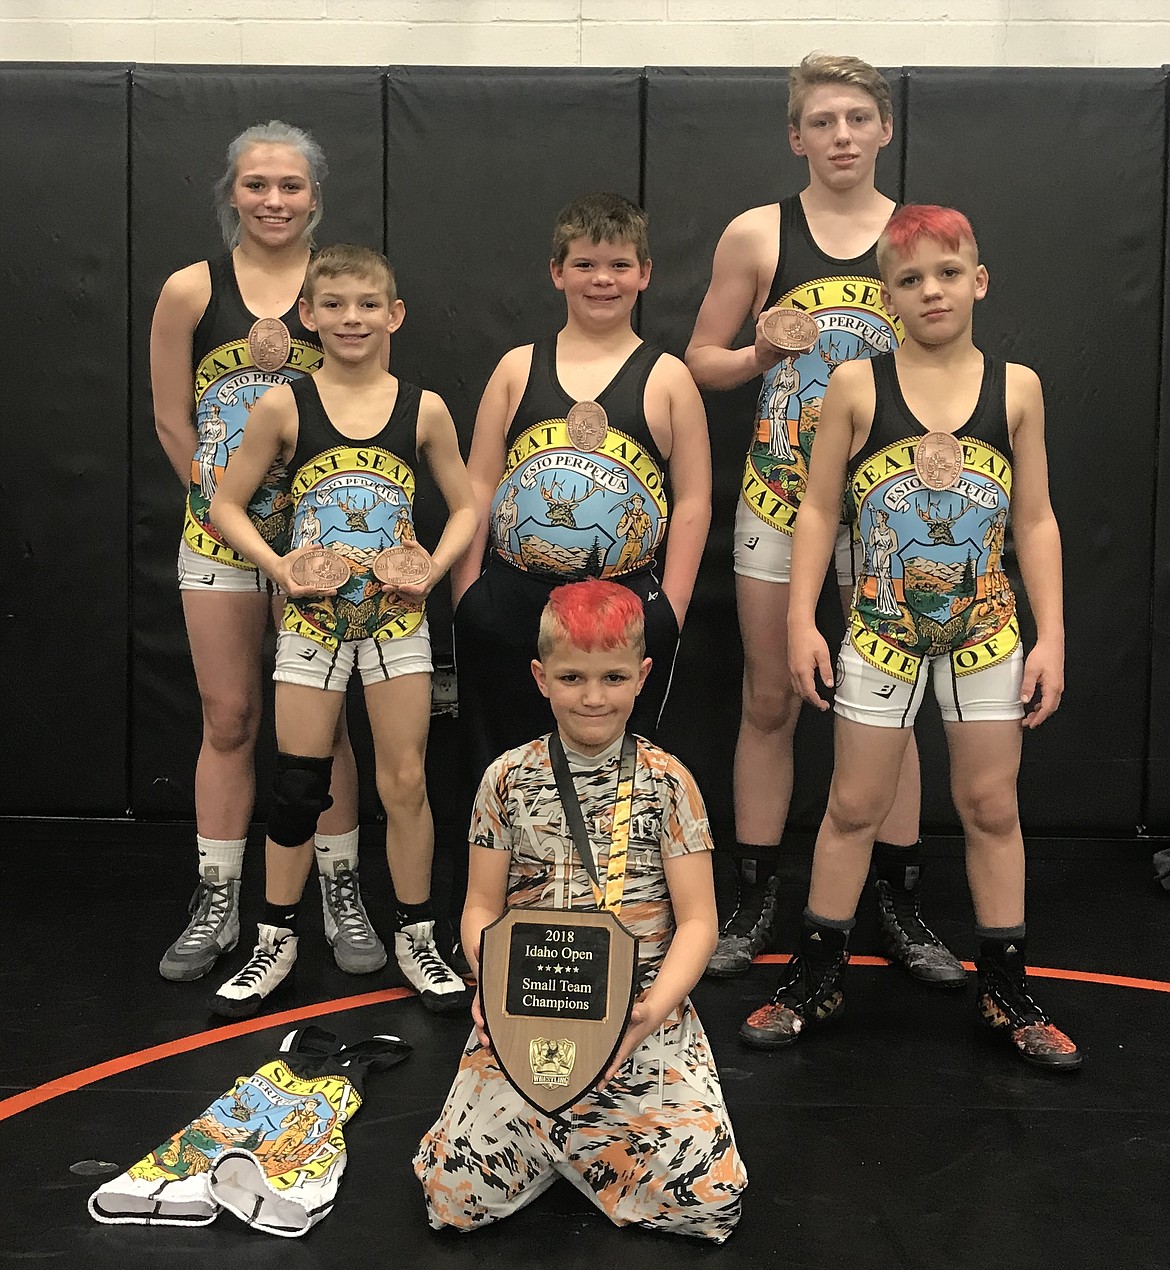 A group of Team Real Life wrestlers traveled to Meridian for the inaugural edition of the Idaho Open. This is a new tournament sponsored by Idaway wrestling and USA Wrestling. Team Real Life won the small team award. Pictured below holding the small team plaque is Matthew Hamilton, 3rd. Also pictured are Devine Hill, champion; Rider Seguine, champion in two classes; Caleb Alverson, champion; Johnny Hill, champion and Damion Hamilton, champion.
Courtesy photo